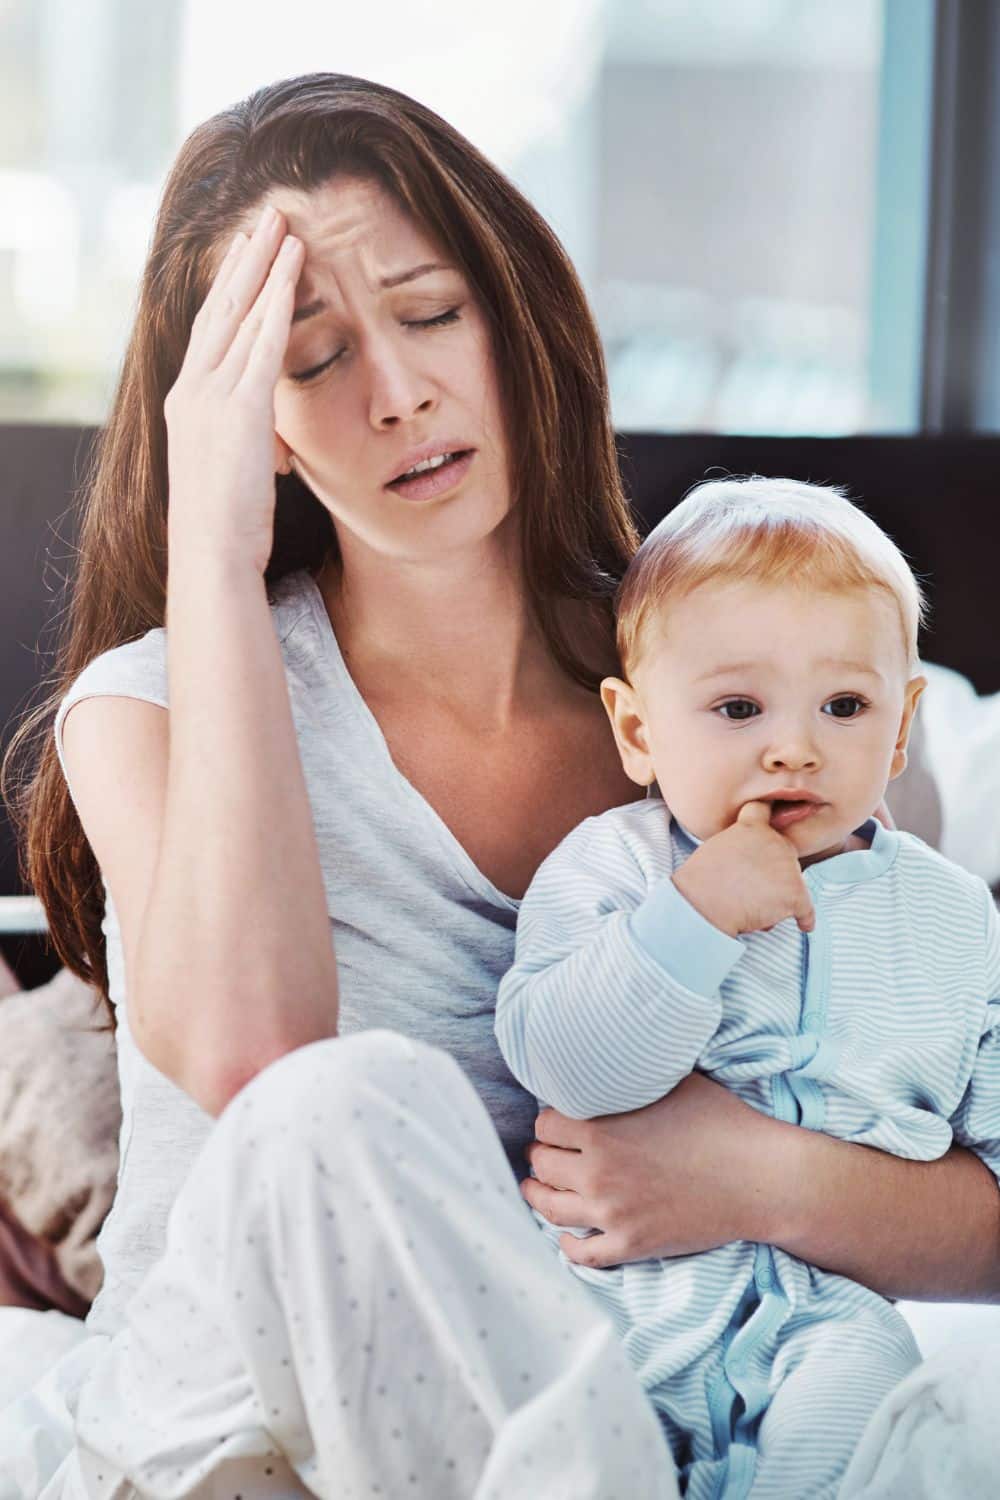 5 Expert Tips on Coping with Parental Anxiety